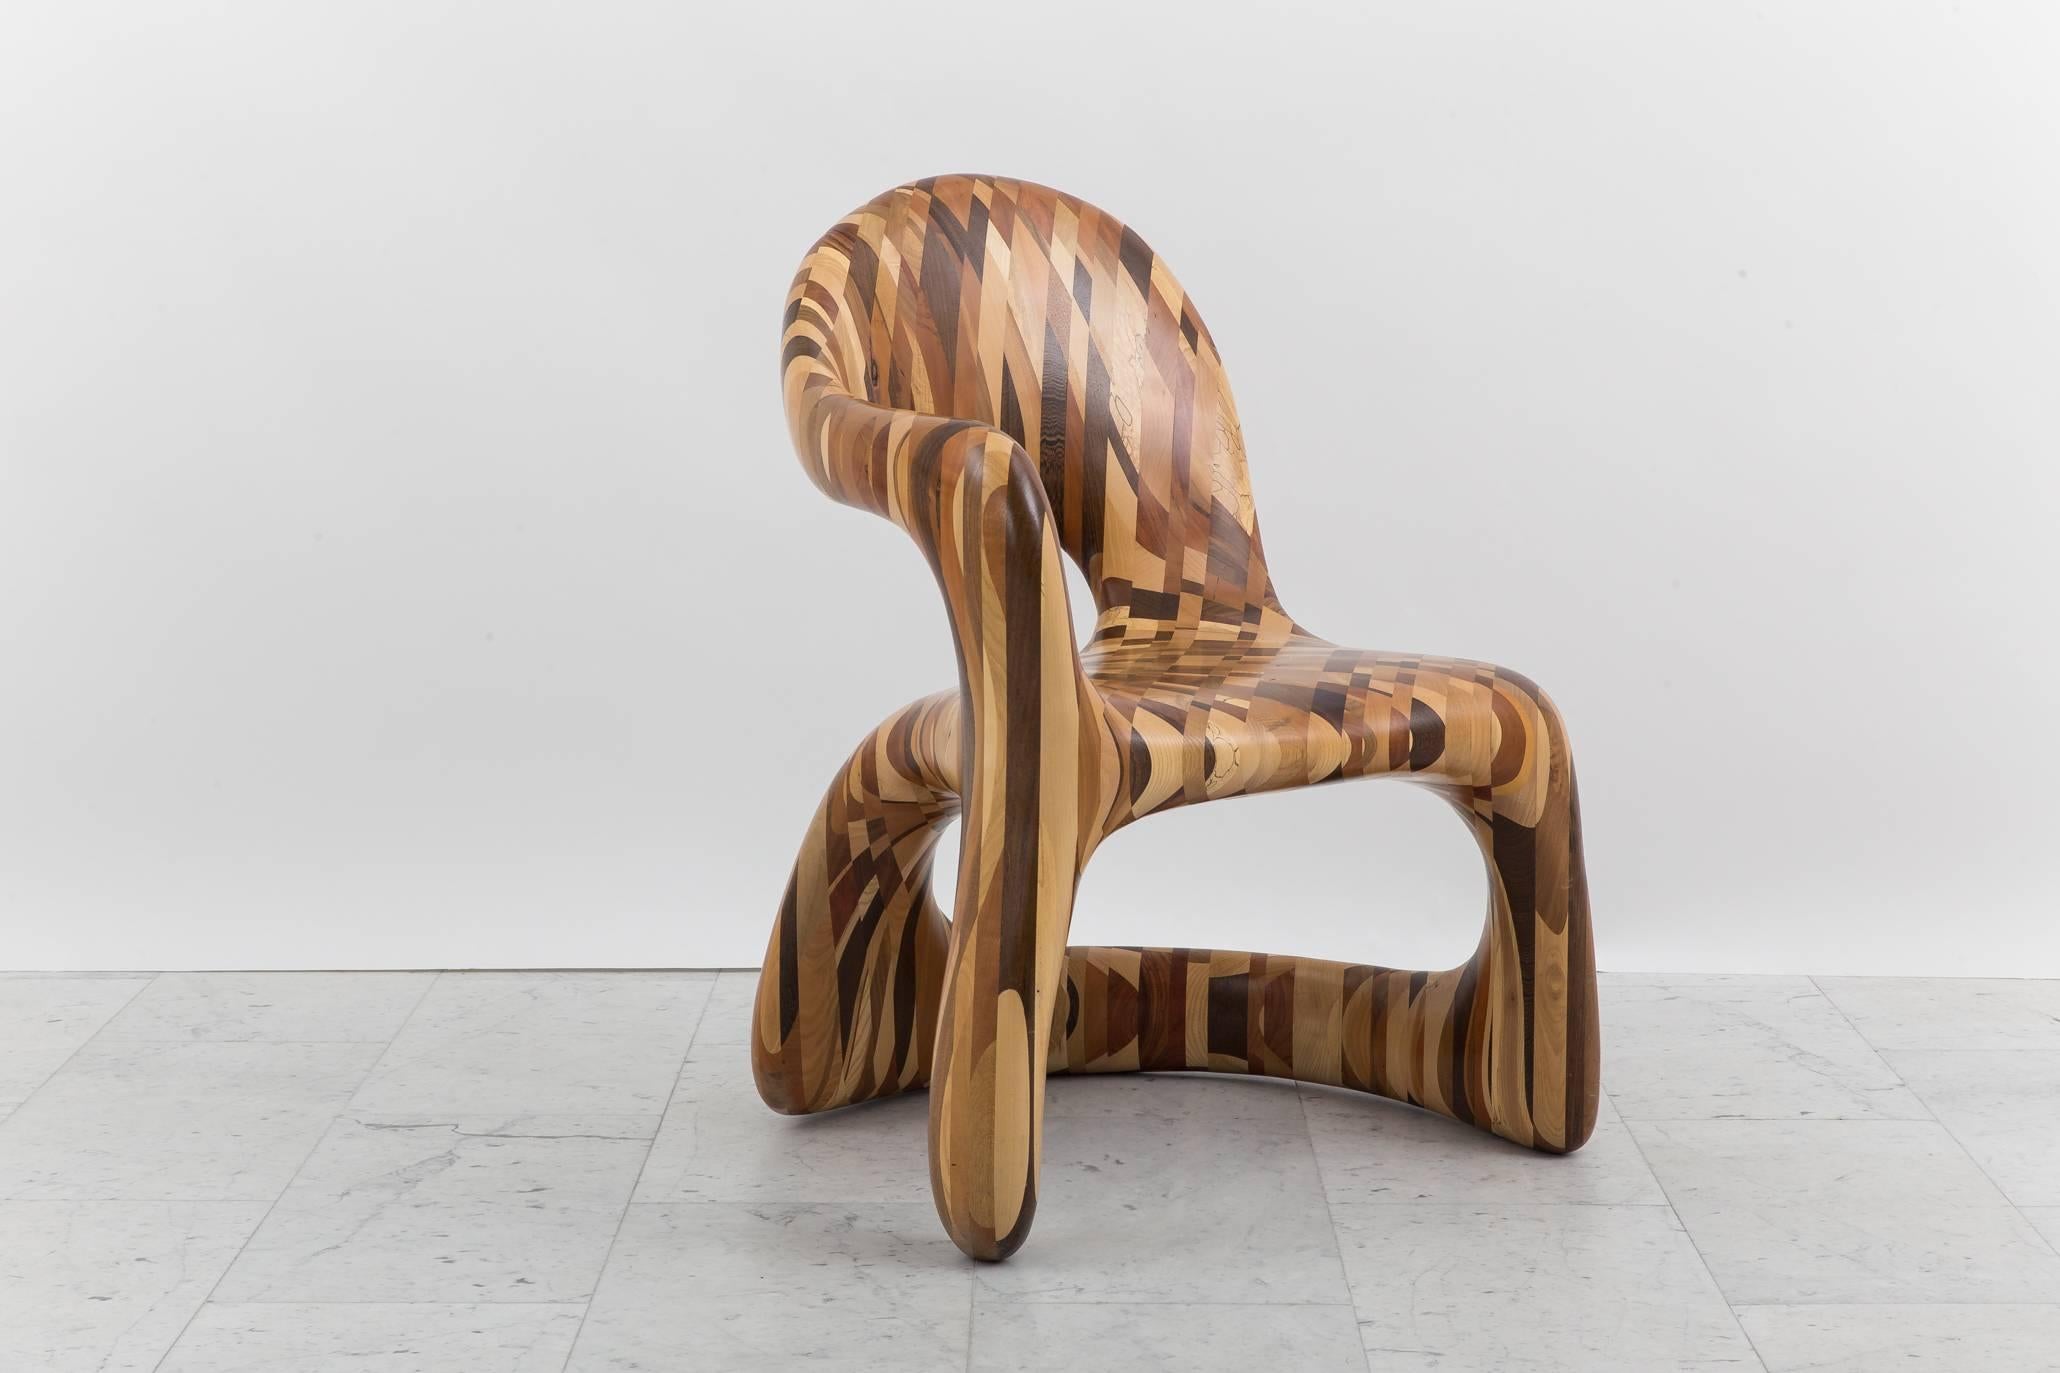 A hand-carved unique sculptural chair by Ian Spencer and Cairn Young of Yard Sale Project, the Corsican chair explores new possibilities and combinations in wood.

Challenging the traditional view of what a chair is, this unique work is both